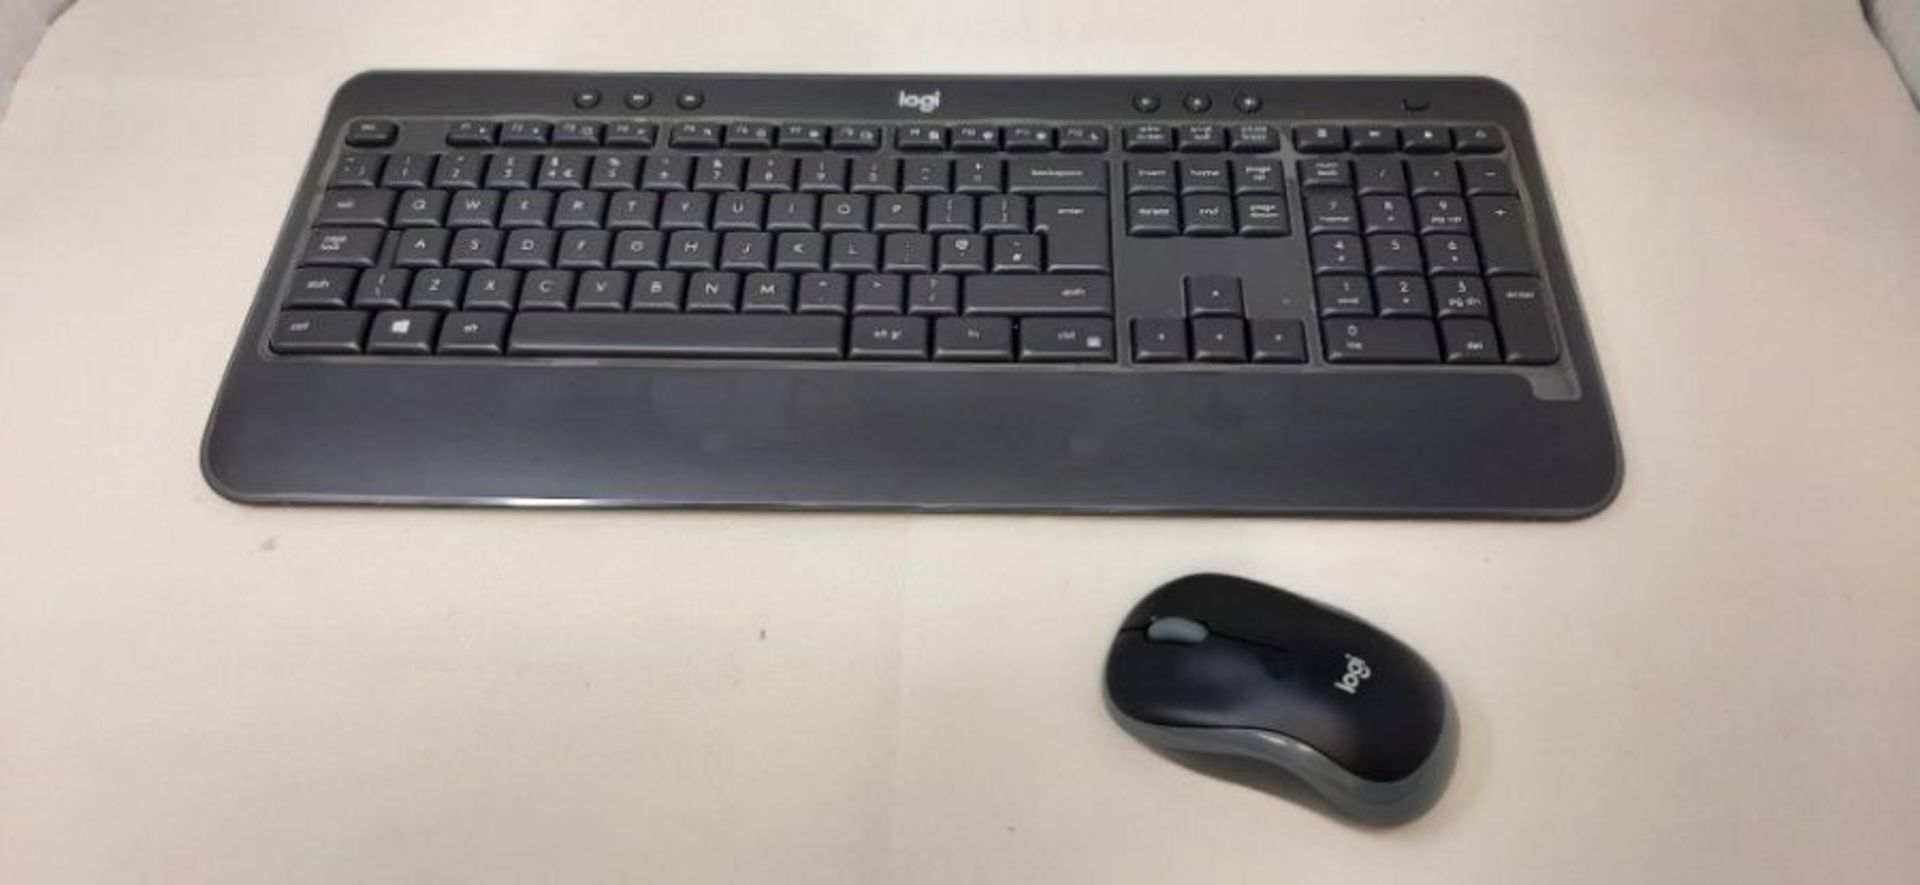 Logitech MK540 Wireless Keyboard and Mouse Combo for Windows, 2.4 GHz Wireless with Un - Image 2 of 2